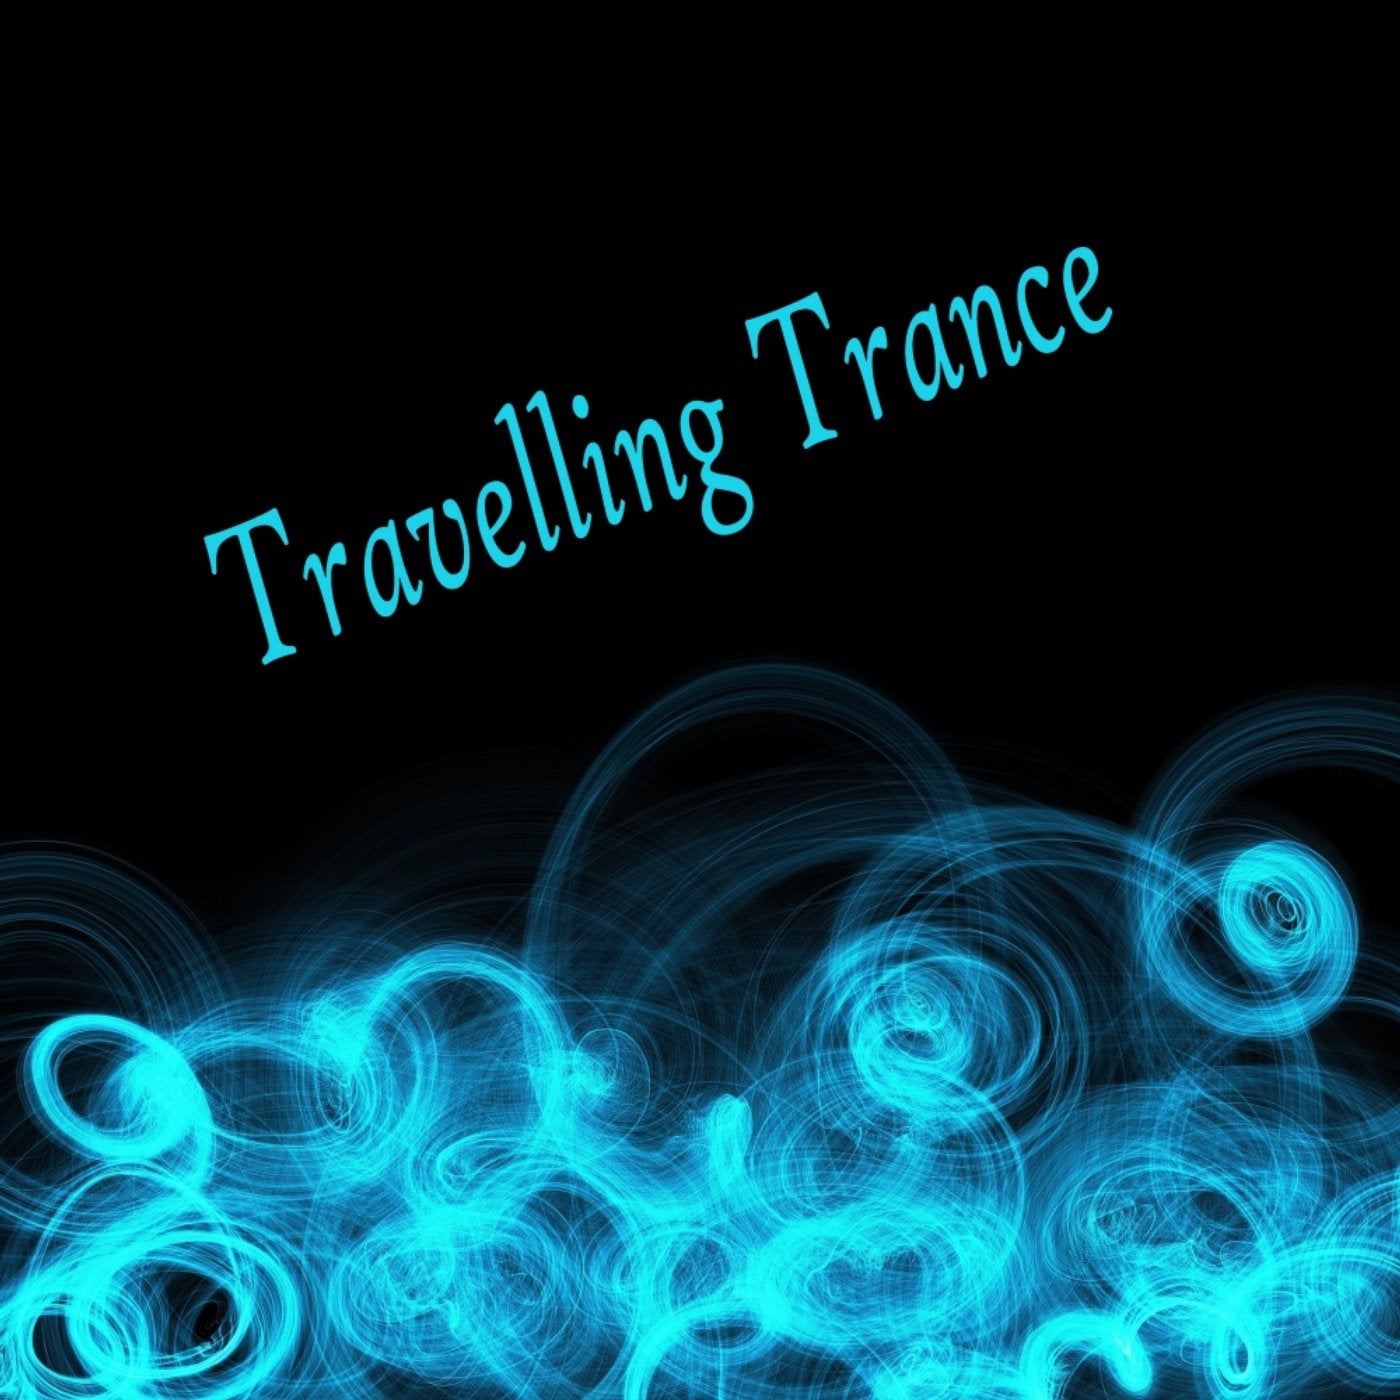 Travelling Trance